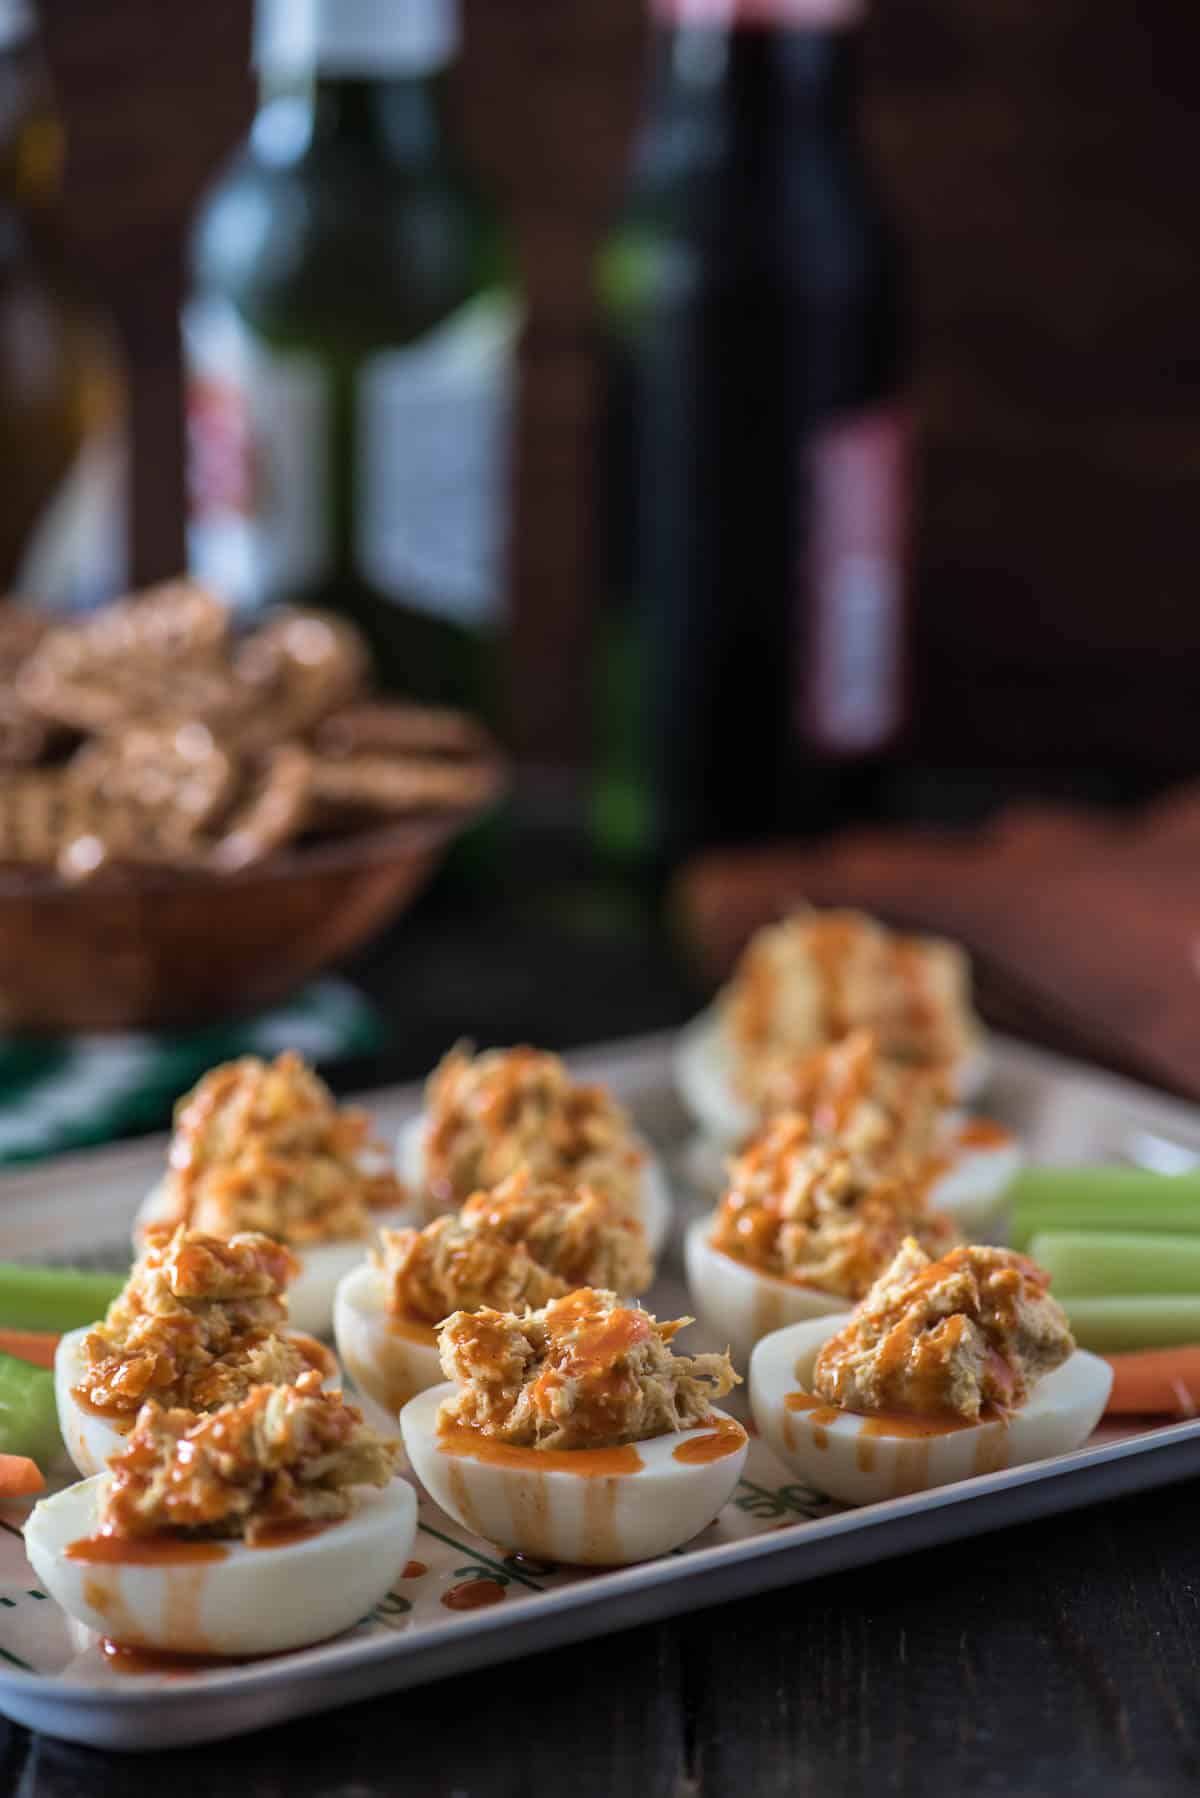 Can't decide between the chicken or the egg? Have both! These Buffalo Chicken Deviled Eggs are everything you love about big game appetizers, and so much more!